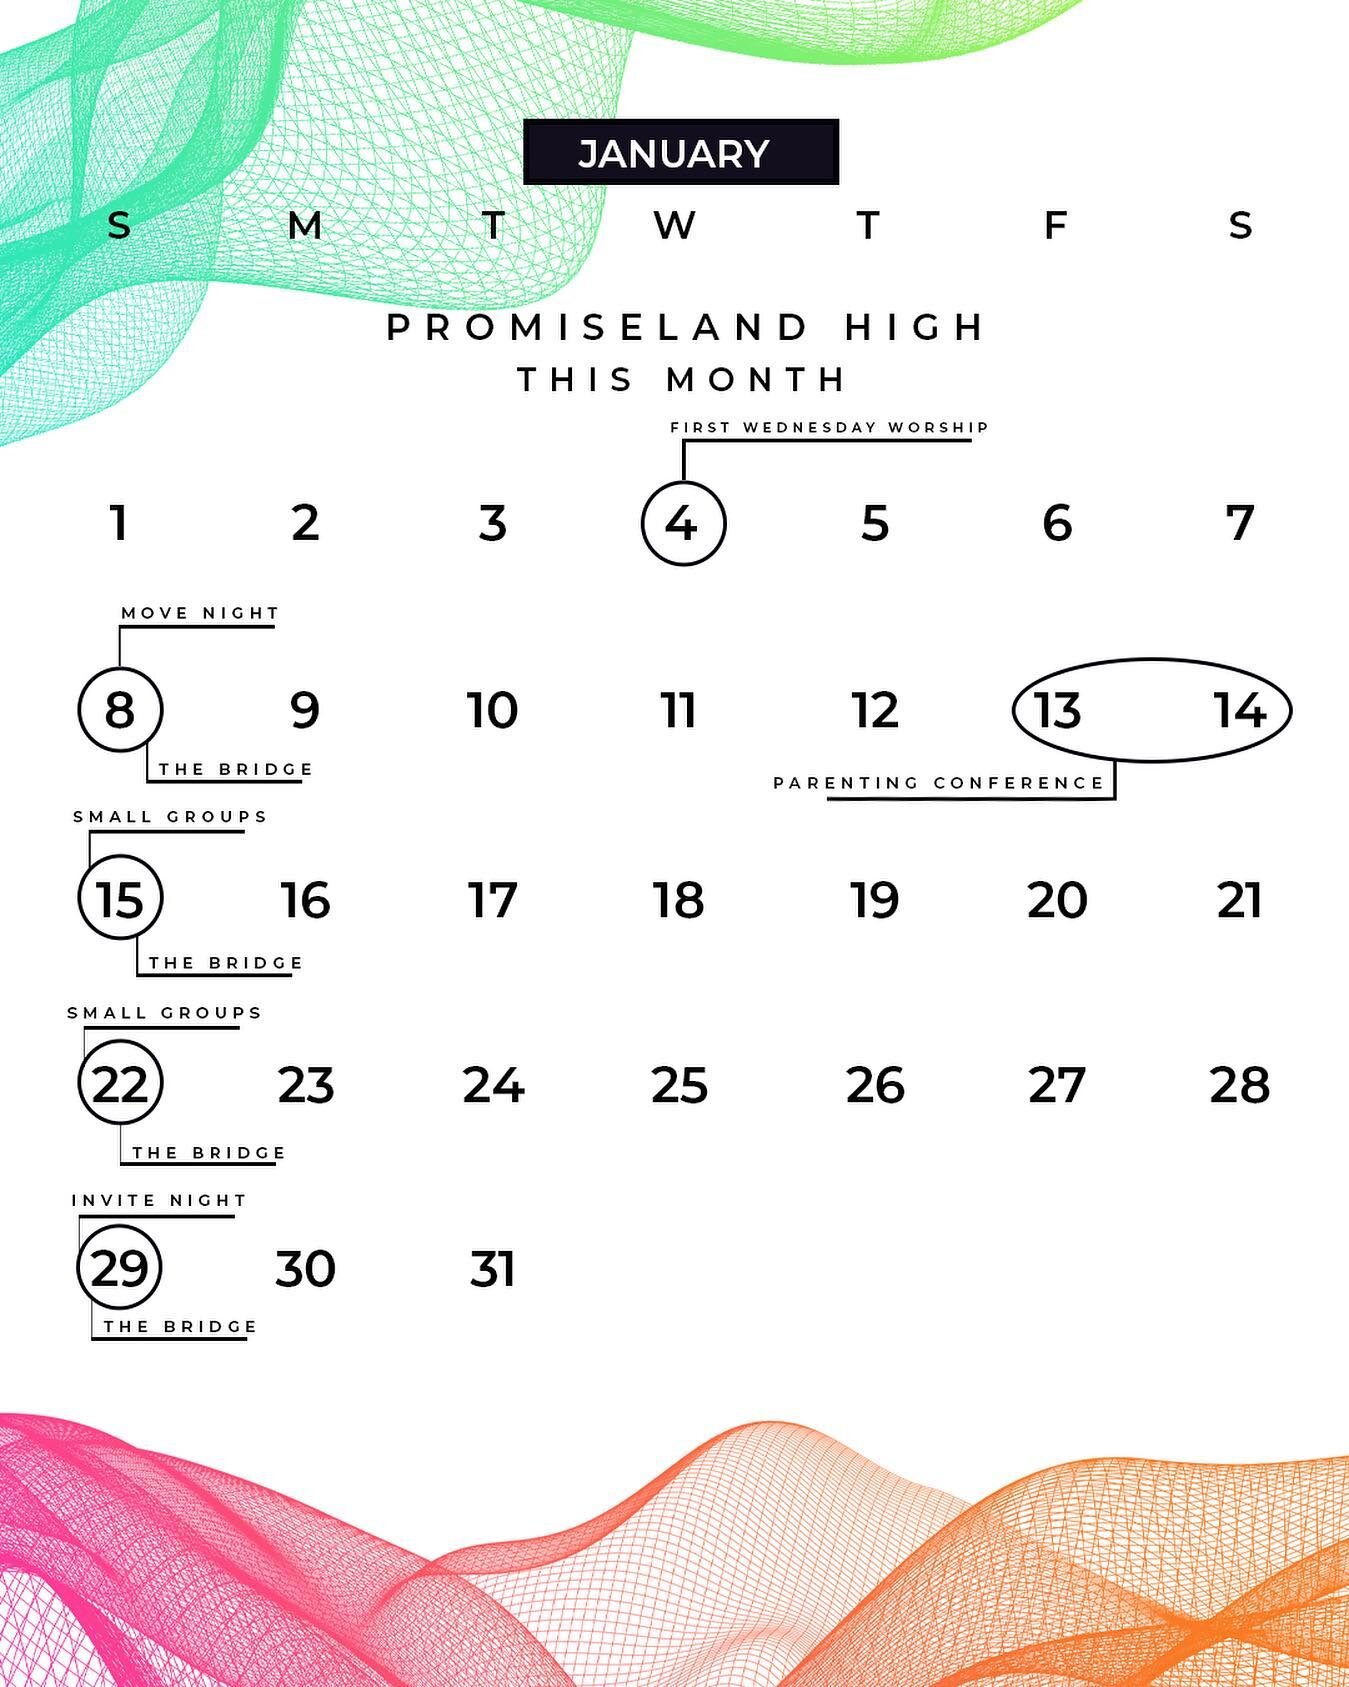 This Month With PromiseLand High